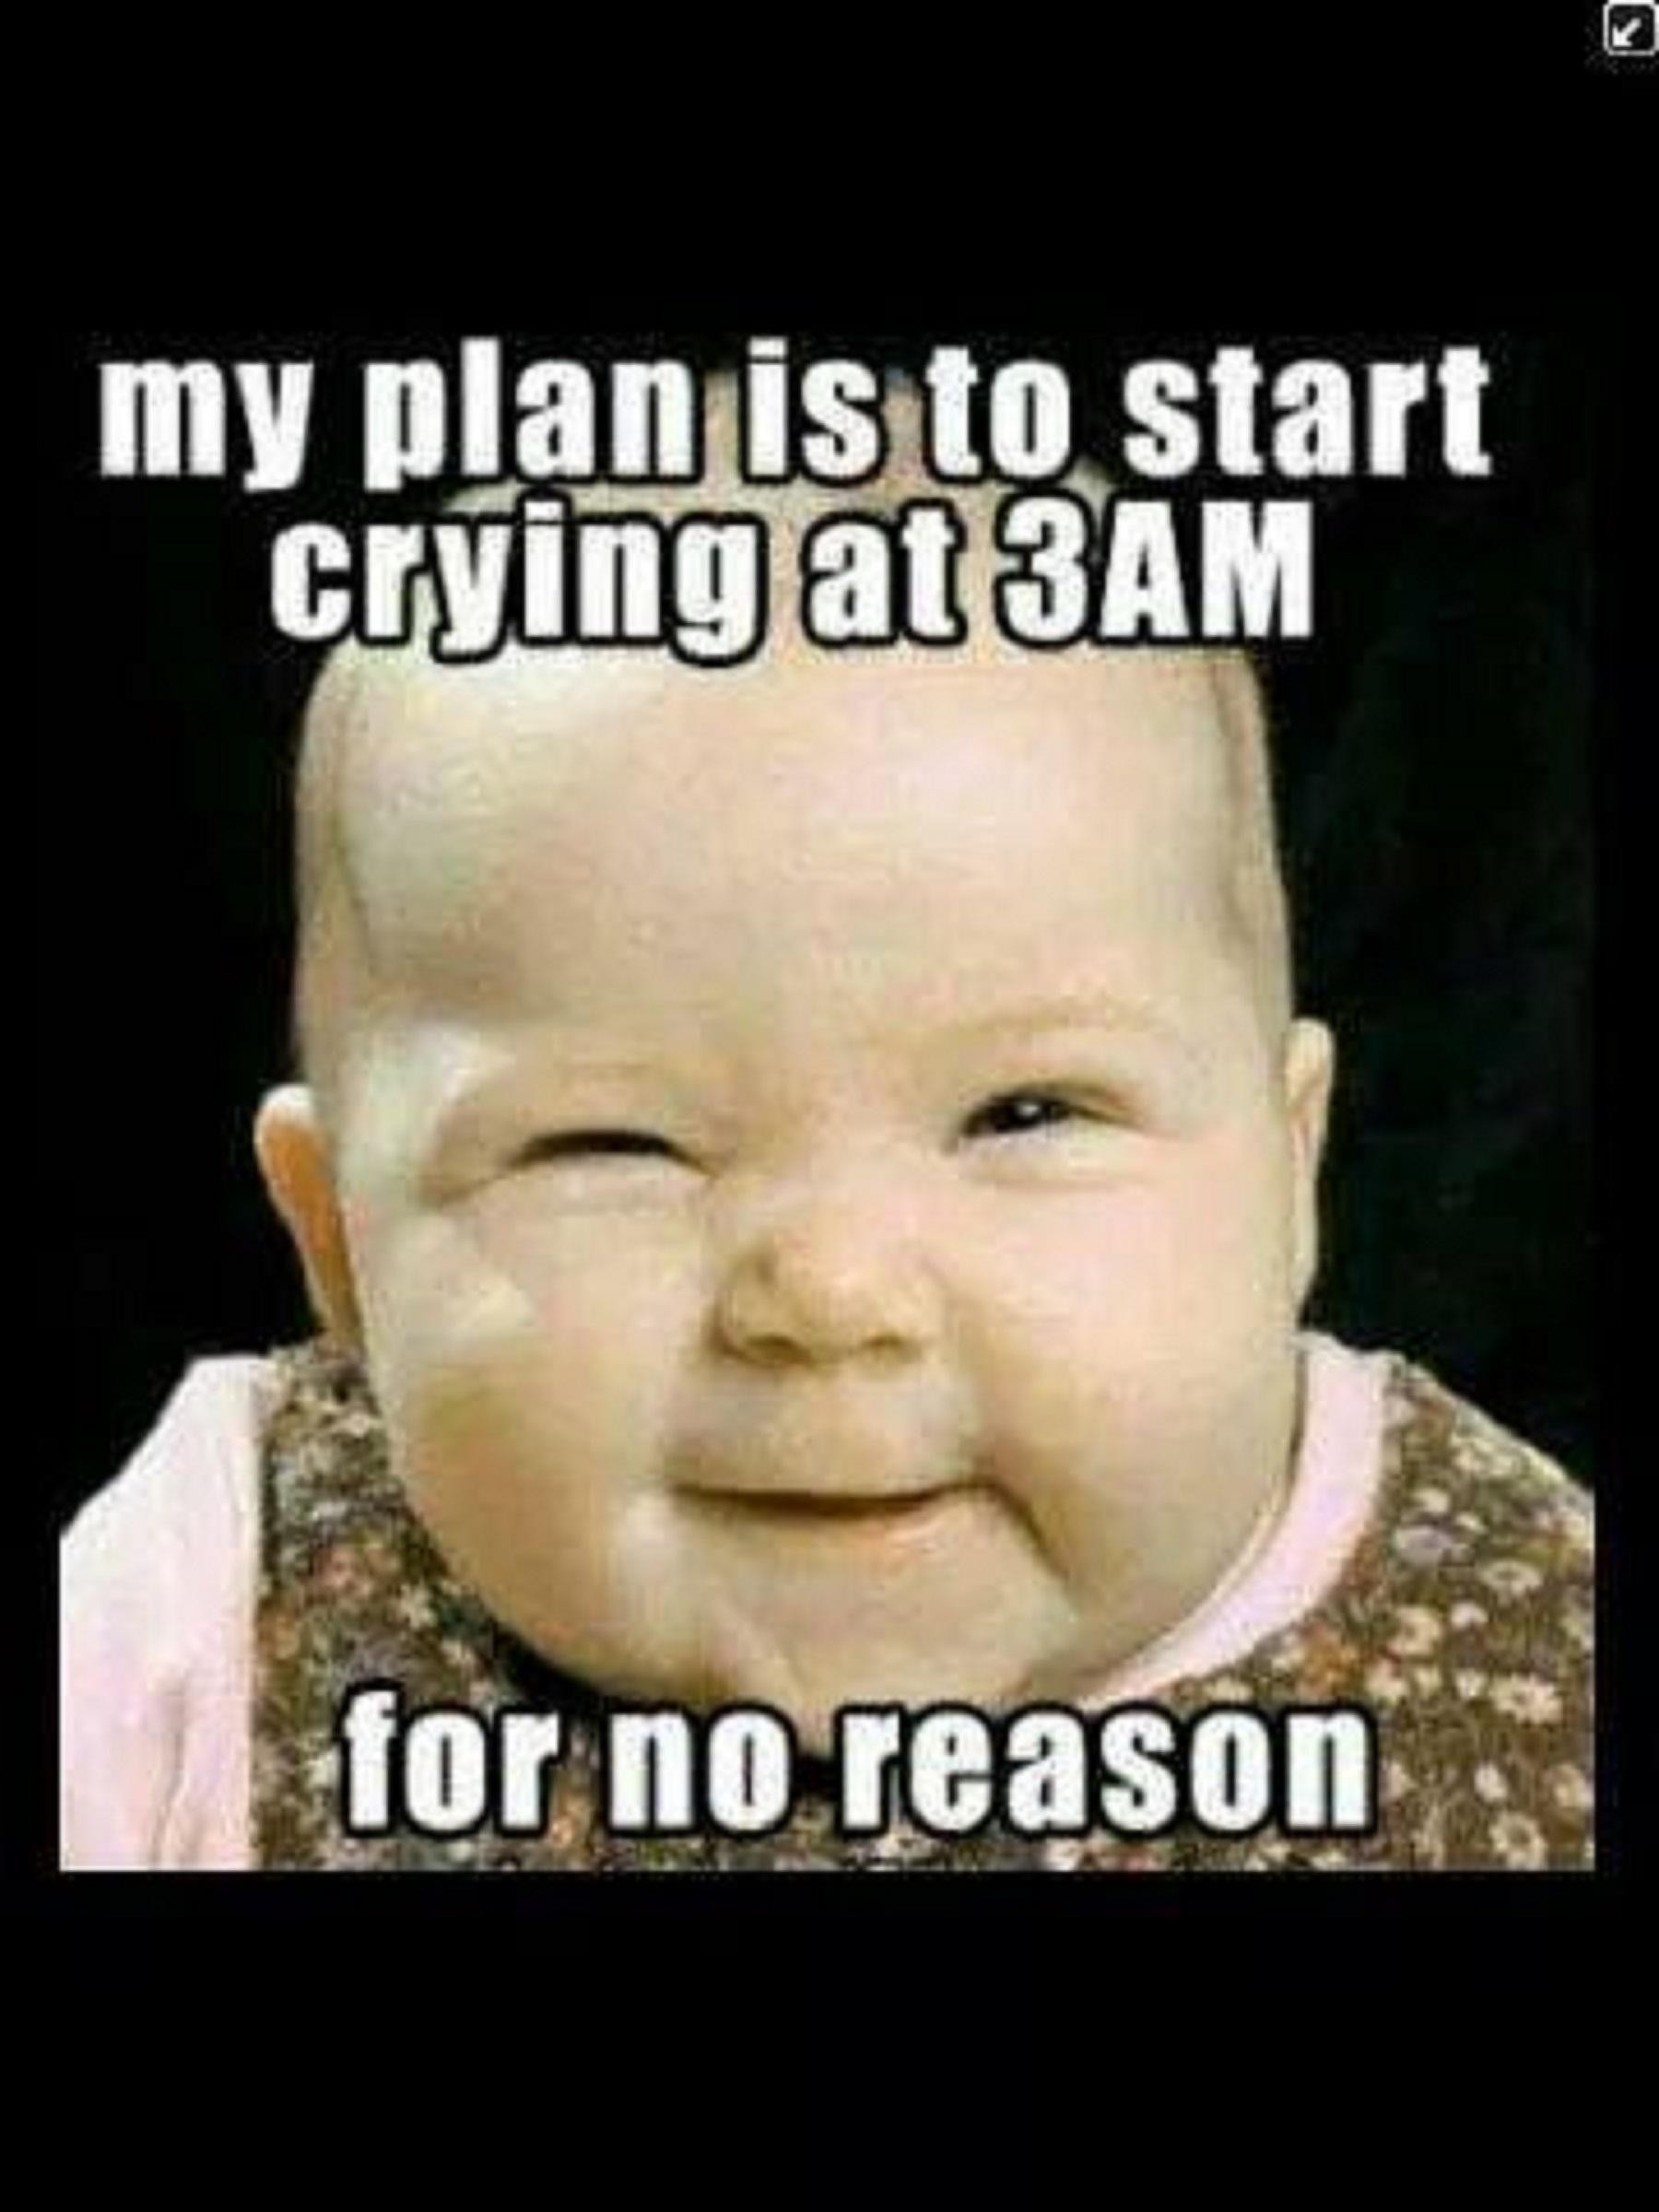 Funny Baby Images With Quotes
 Cute Funny Baby Saying My Plan Is To Start Crying At